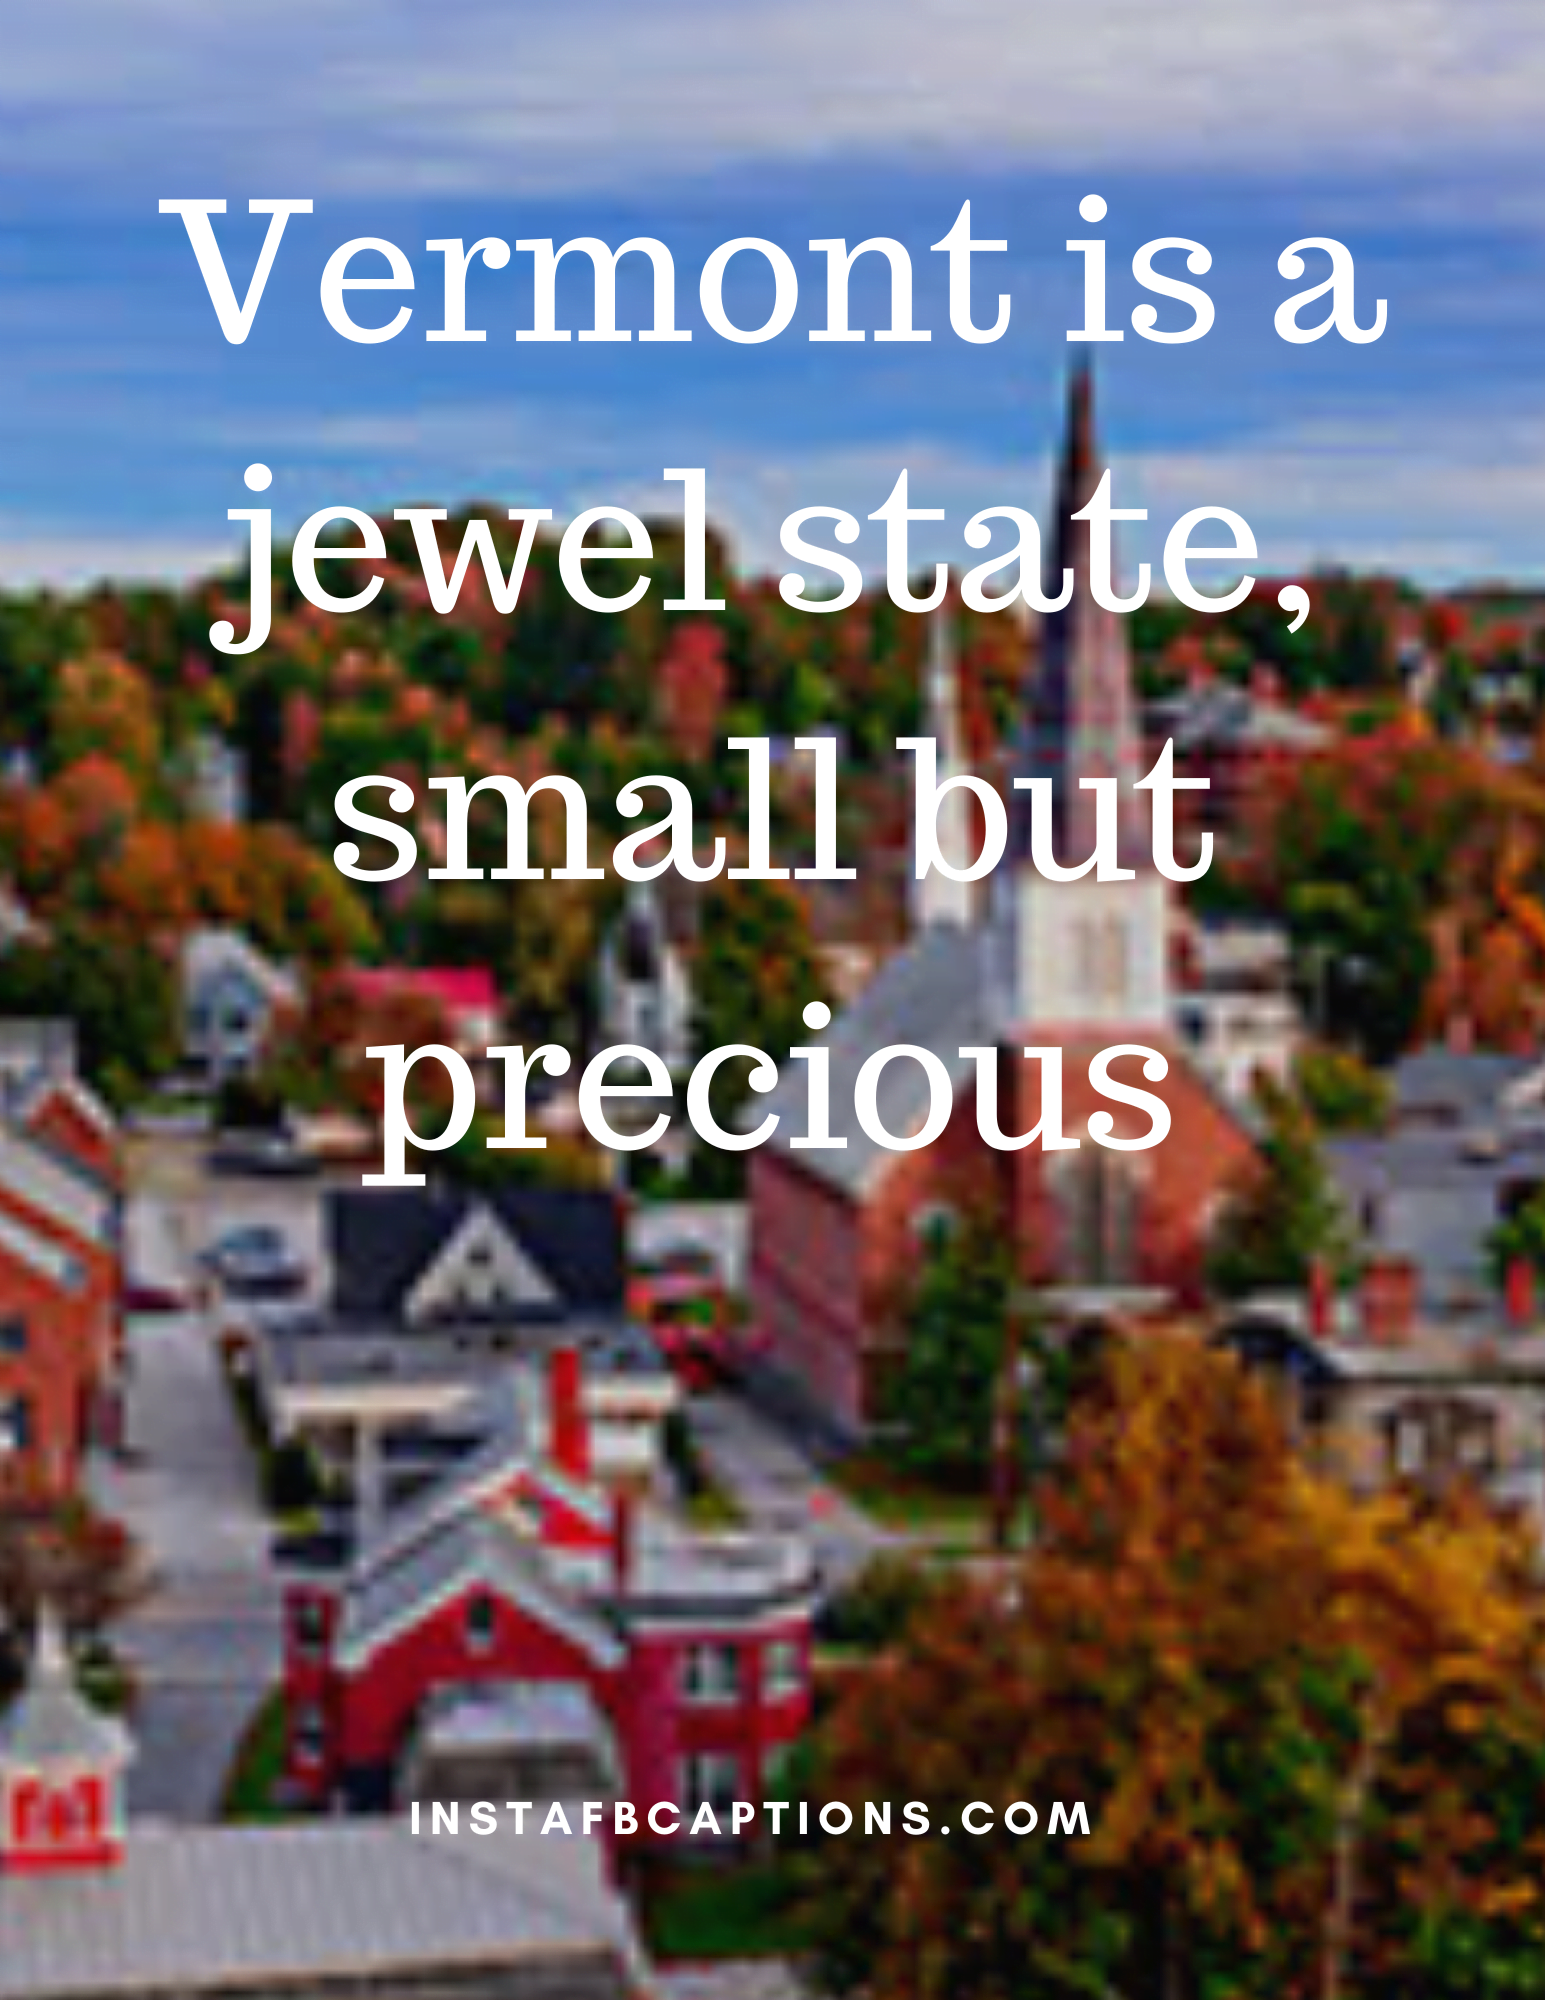 Cute Captions Vermont Instagram  - Cute Captions Vermont Instagram - 80+ VERMONT Instagram Captions, Quotes, and Hashtags in 2022